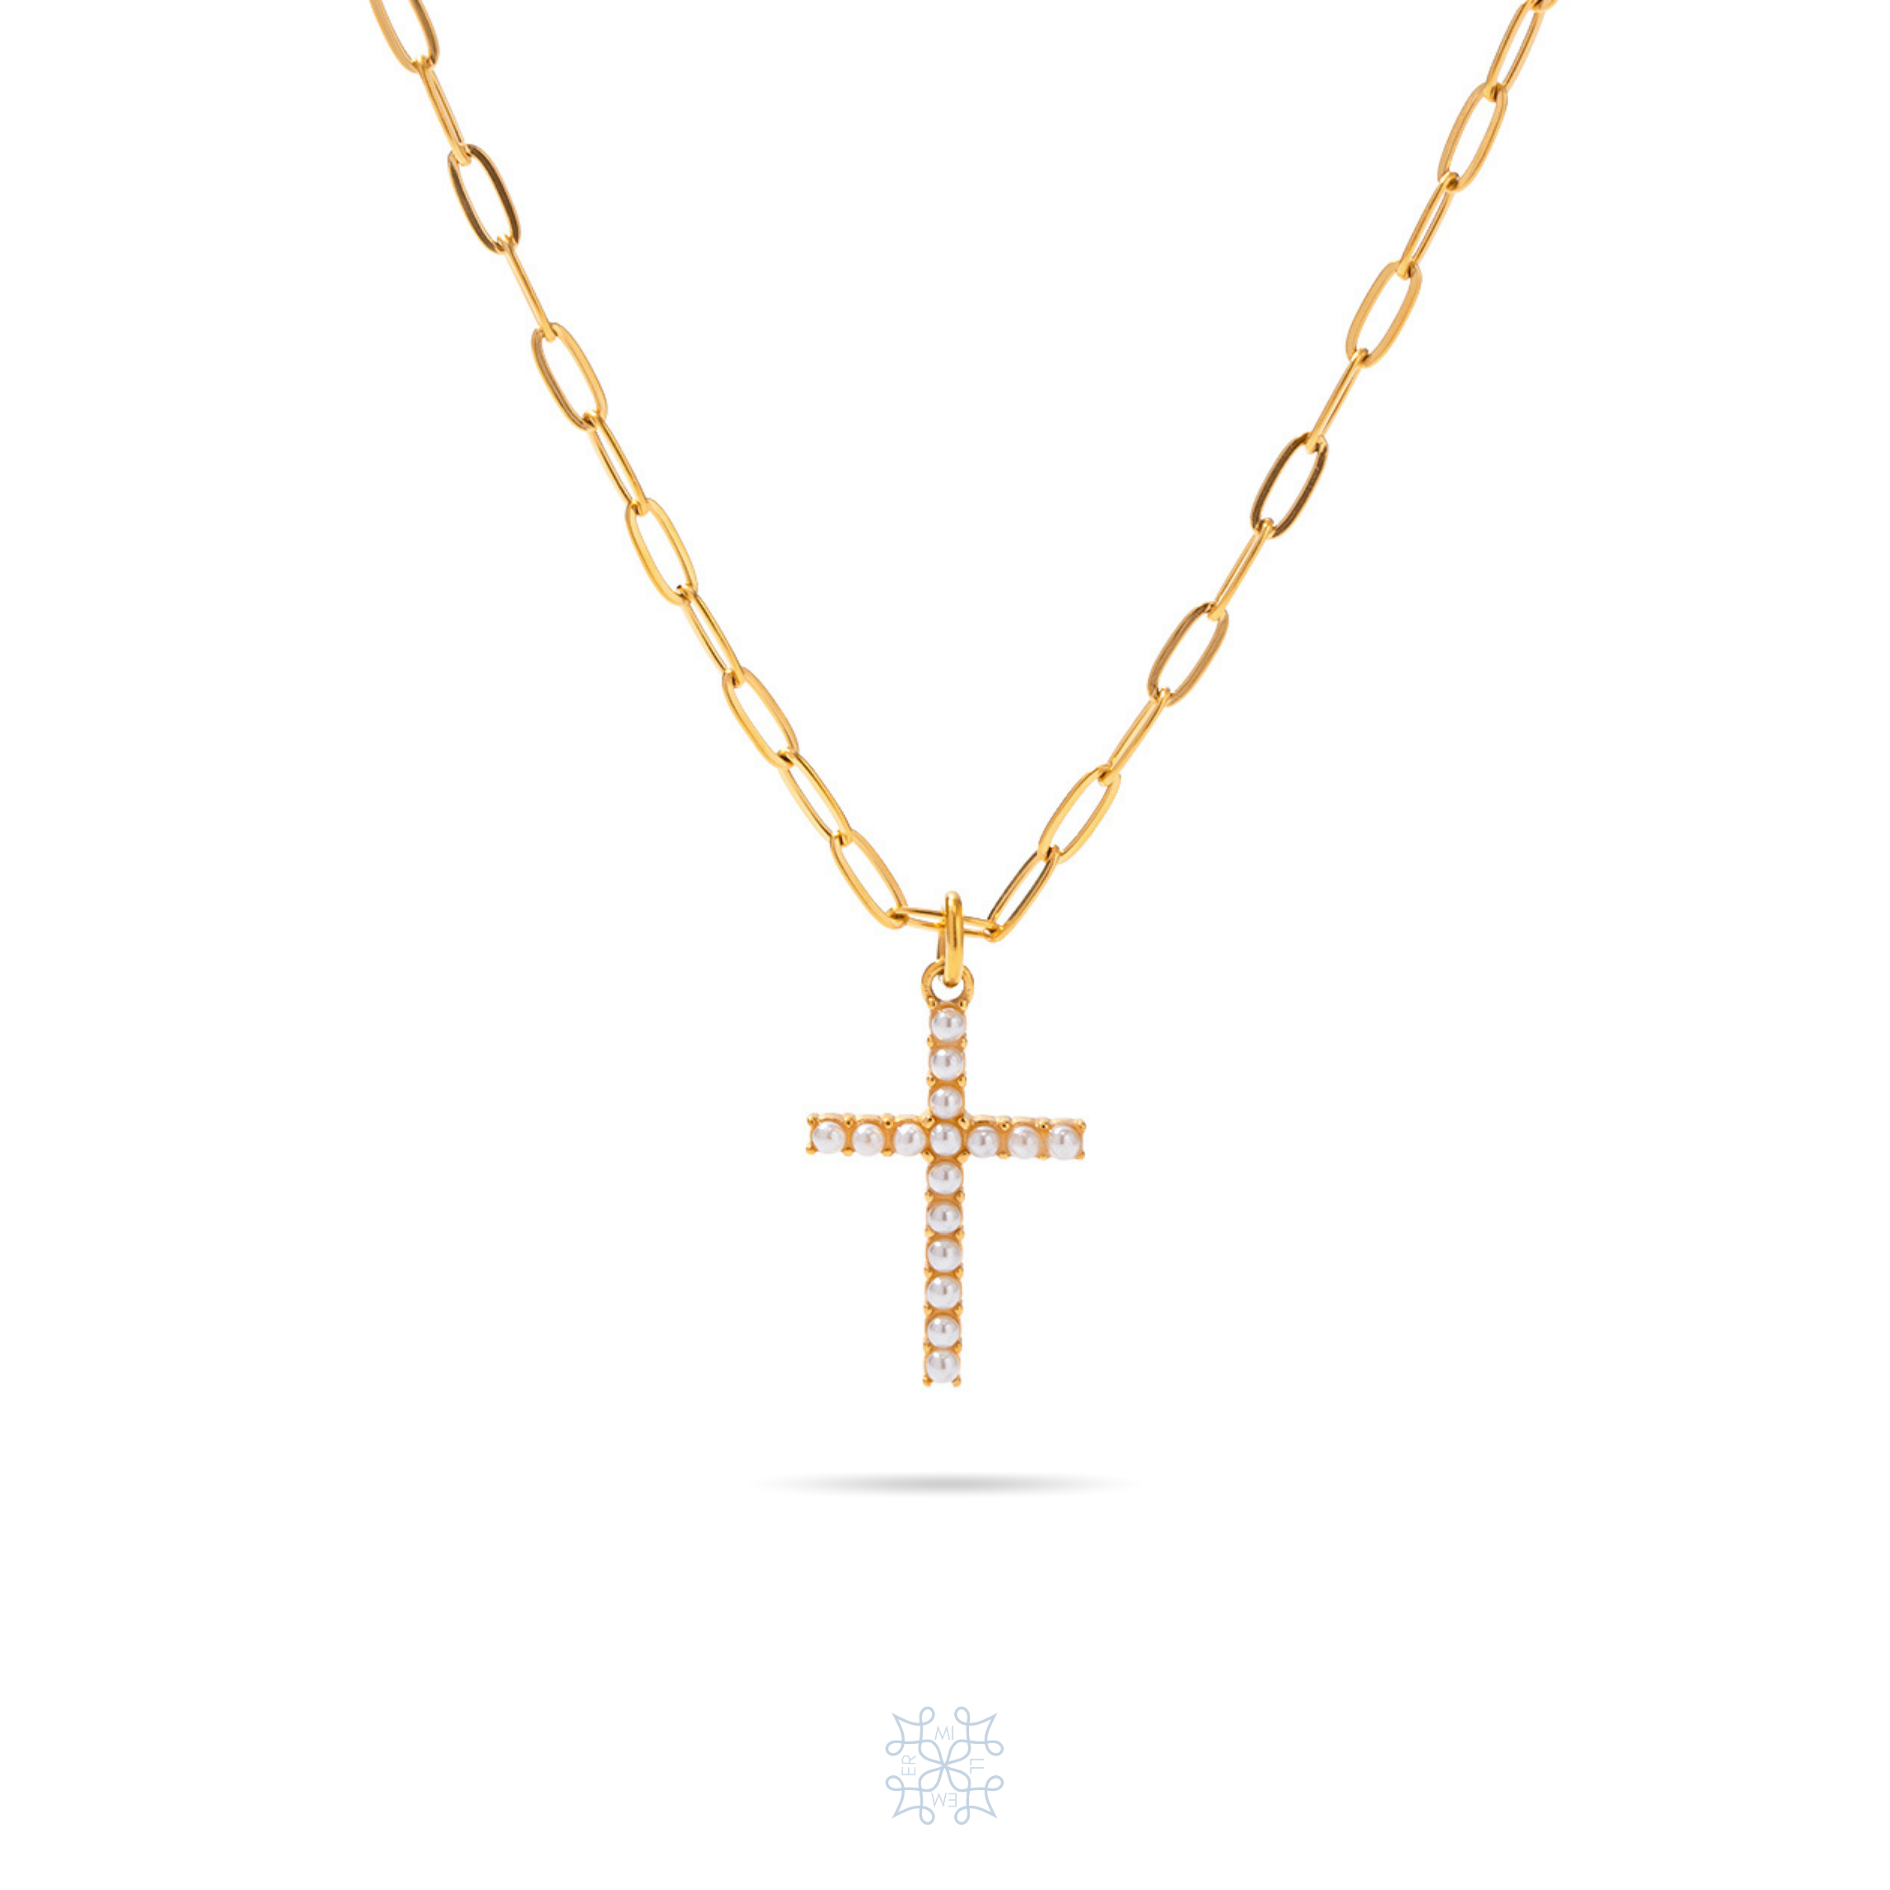 Paperclip gold chain. Gold Cross pendant with small little white pearls attached in all the surface of the cross pendant. Pray pearl cross gold necklace.